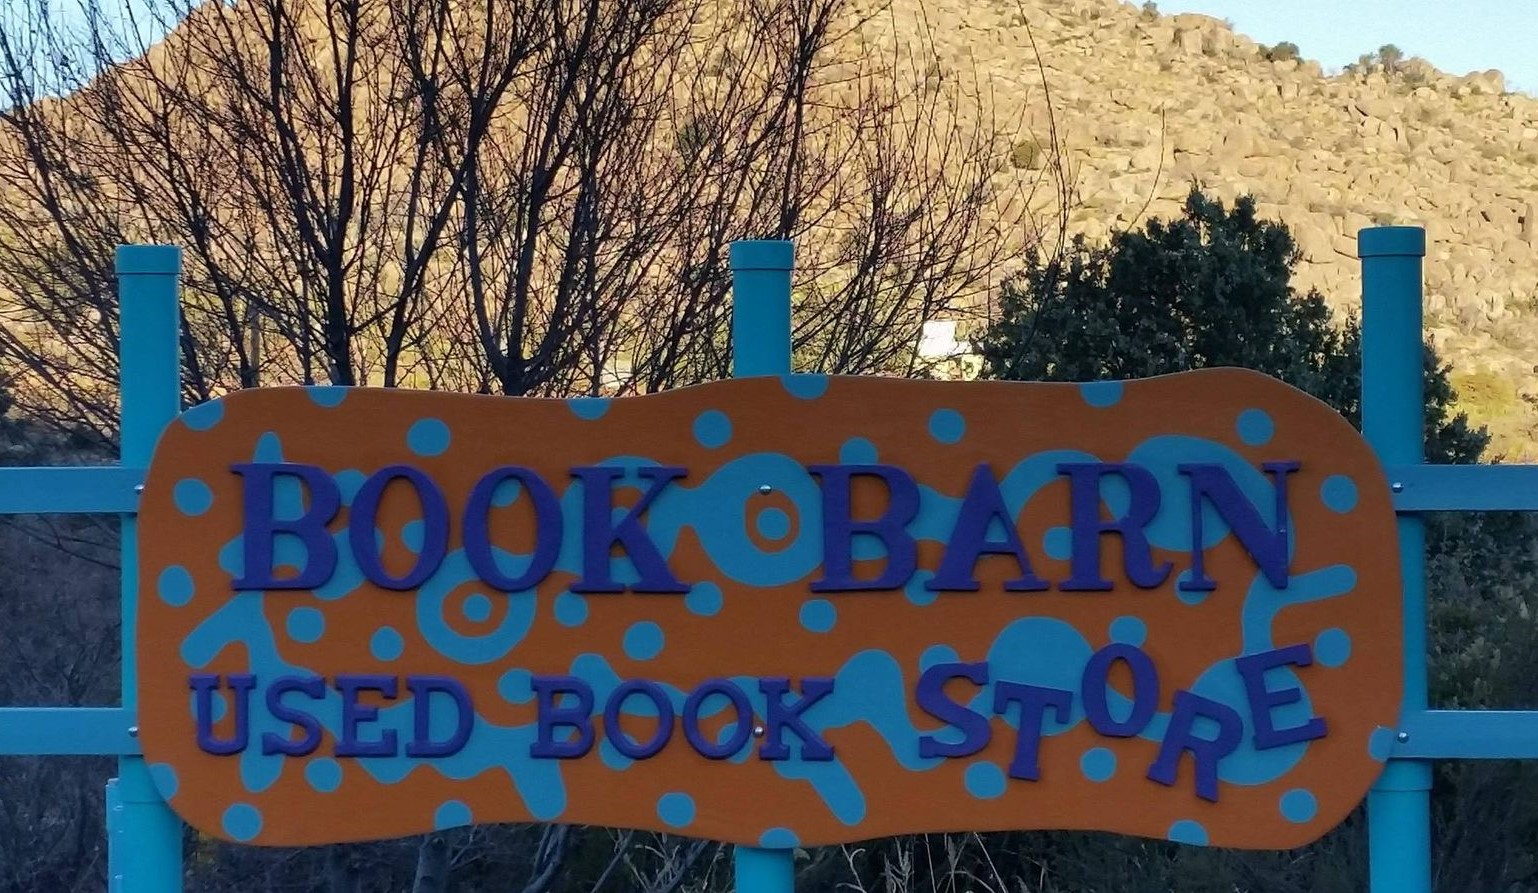 1/2 price sale at Yarnell Friends Book Barn